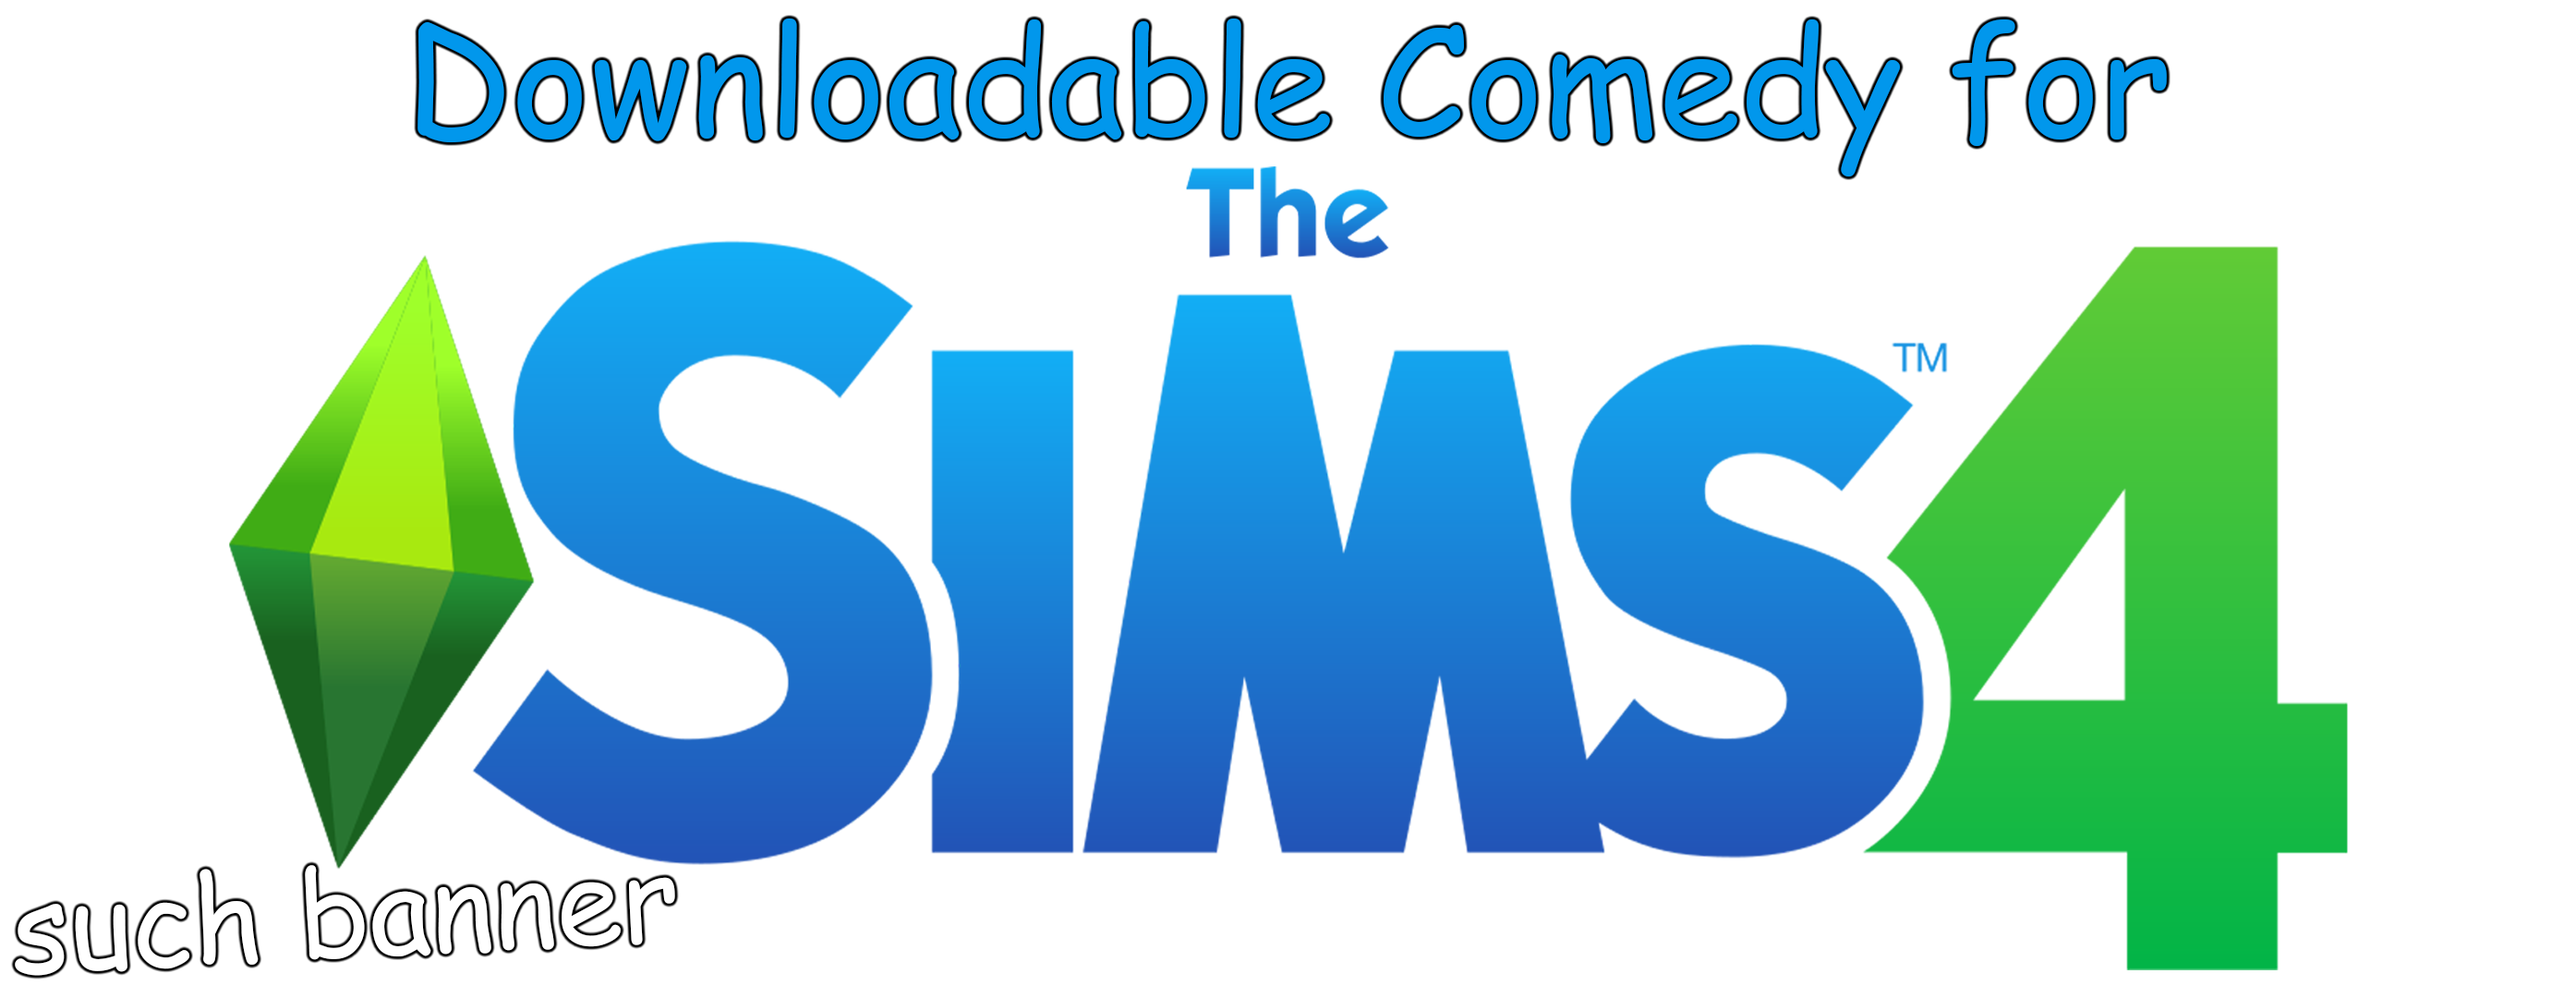 Sims 4 Downloadable Comedy Mod